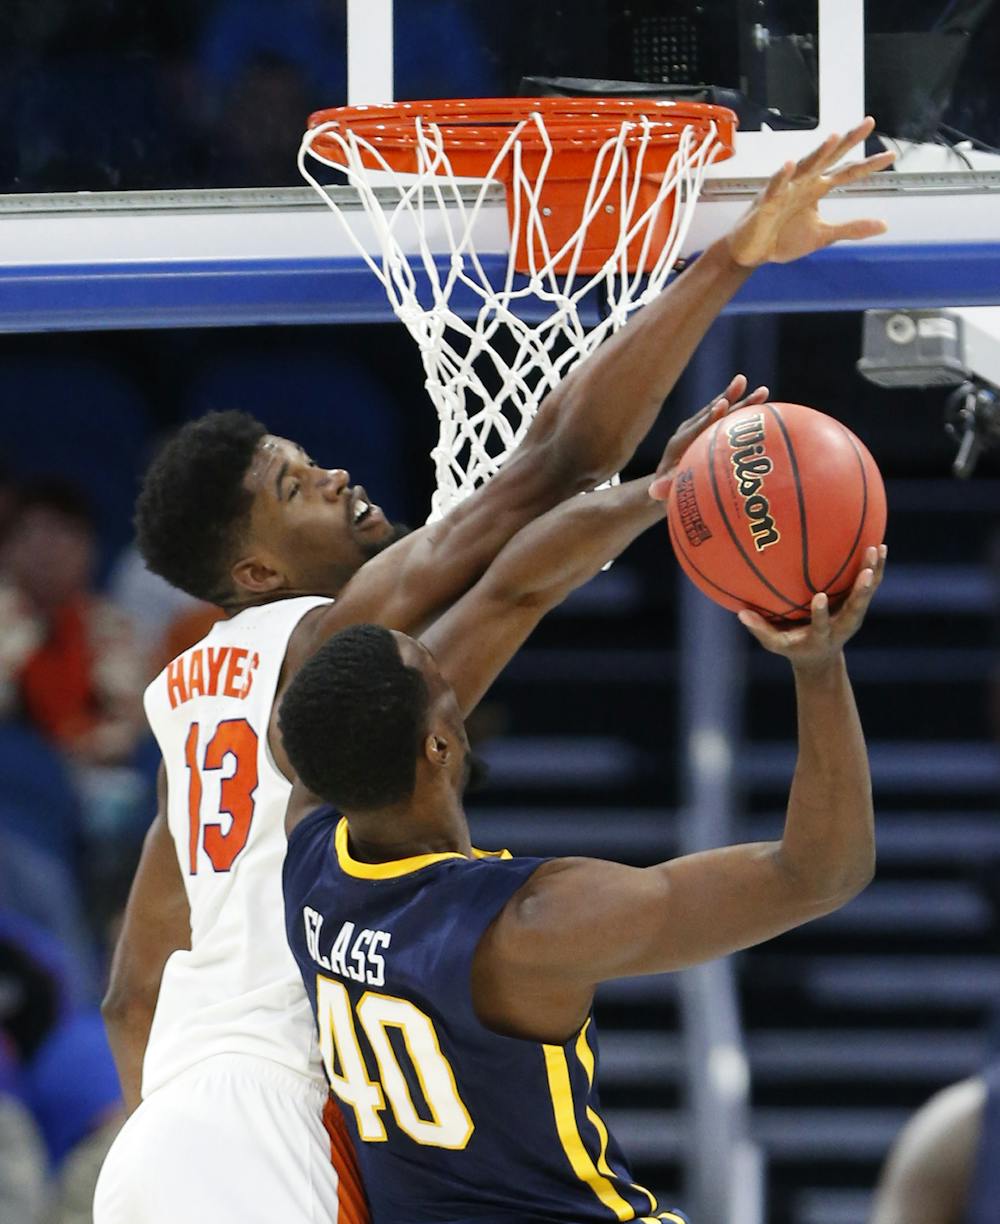 <p>Florida forward Kevarrius Hayes (13) blocks a shot by East Tennessee State forward Tevin Glass (40) during the second half of the first round of the NCAA college basketball tournament, Thursday, March 16, 2017 in Orlando, Fla. Florida defeated ETSU 80-65. (AP Photo/Wilfredo Lee)</p>